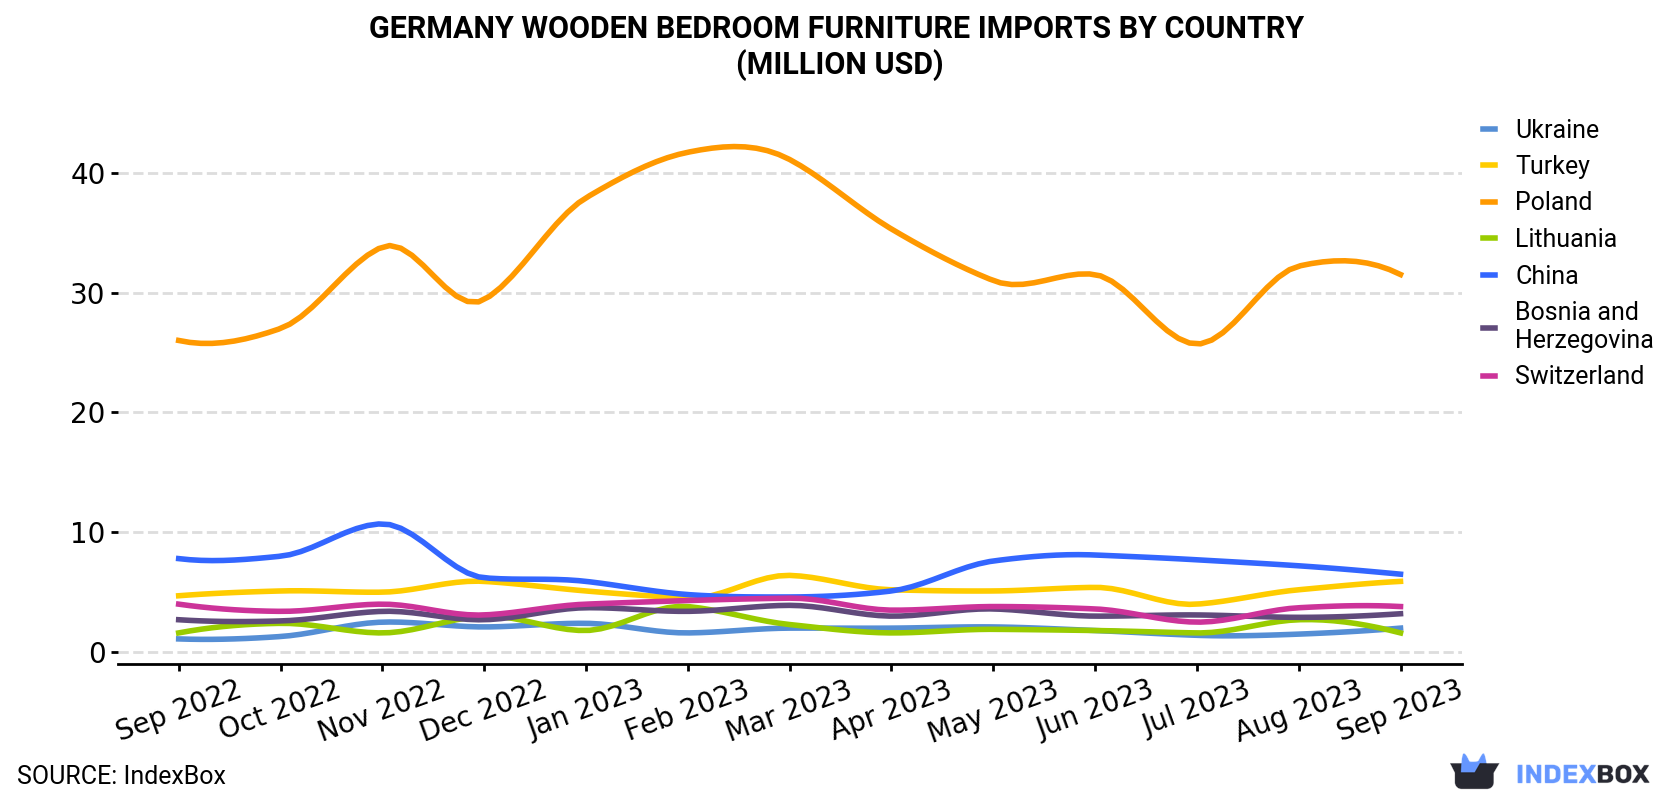 Germany Wooden Bedroom Furniture Imports By Country (Million USD)